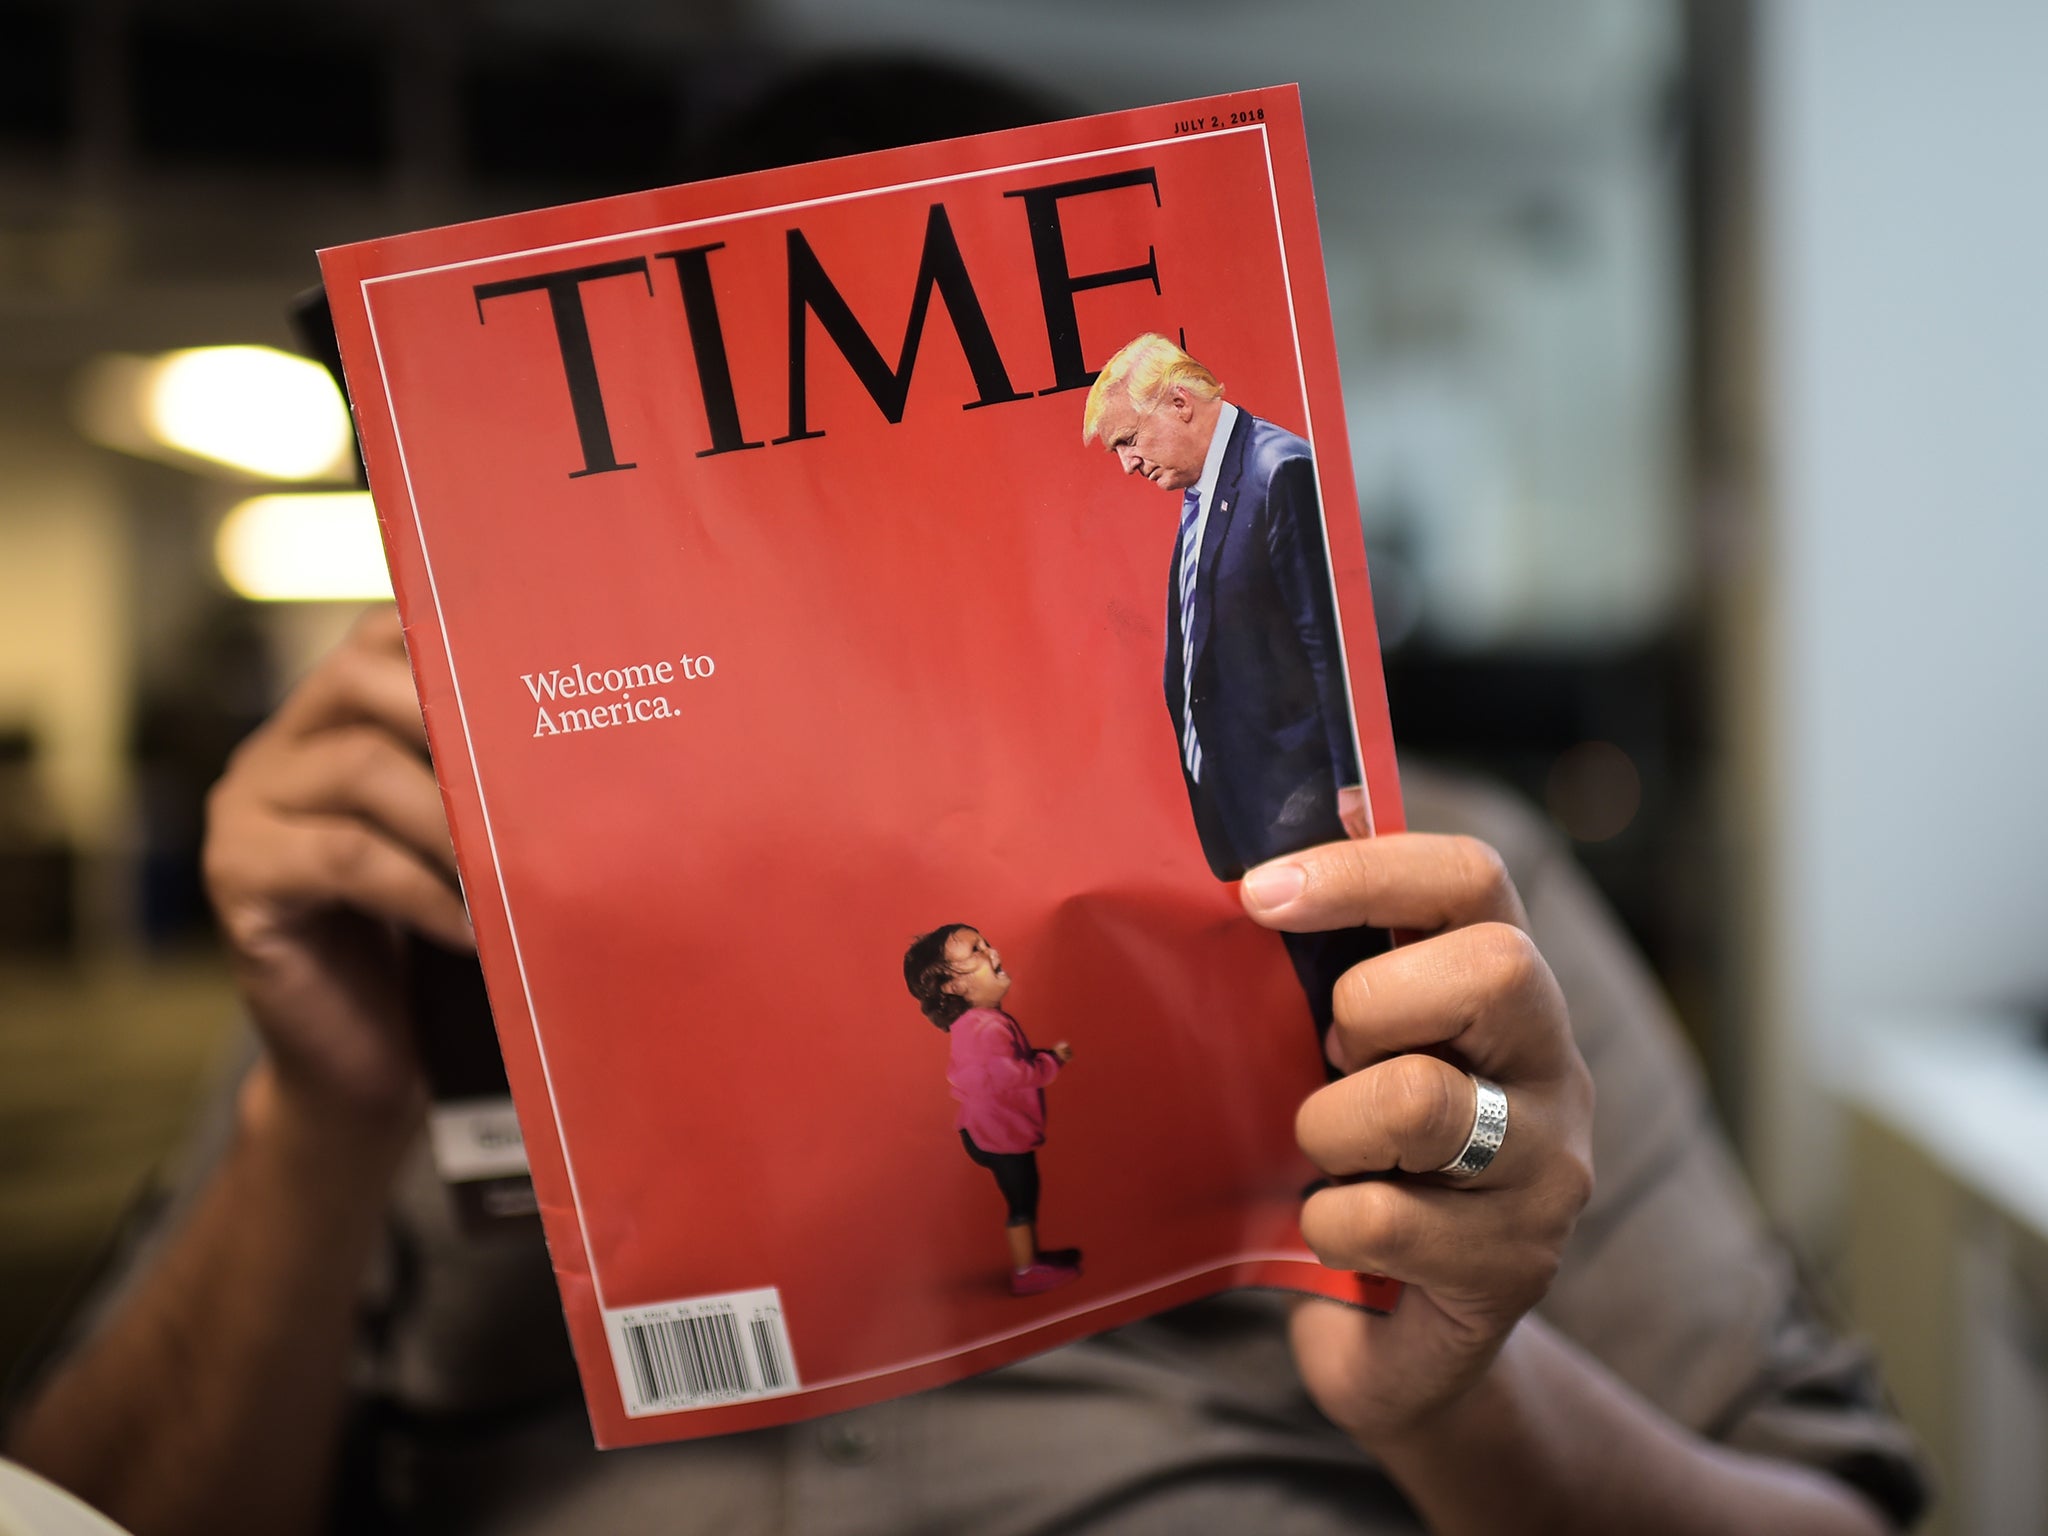 Time Person of the Year 2018 Shortlist includes Trump, Putin